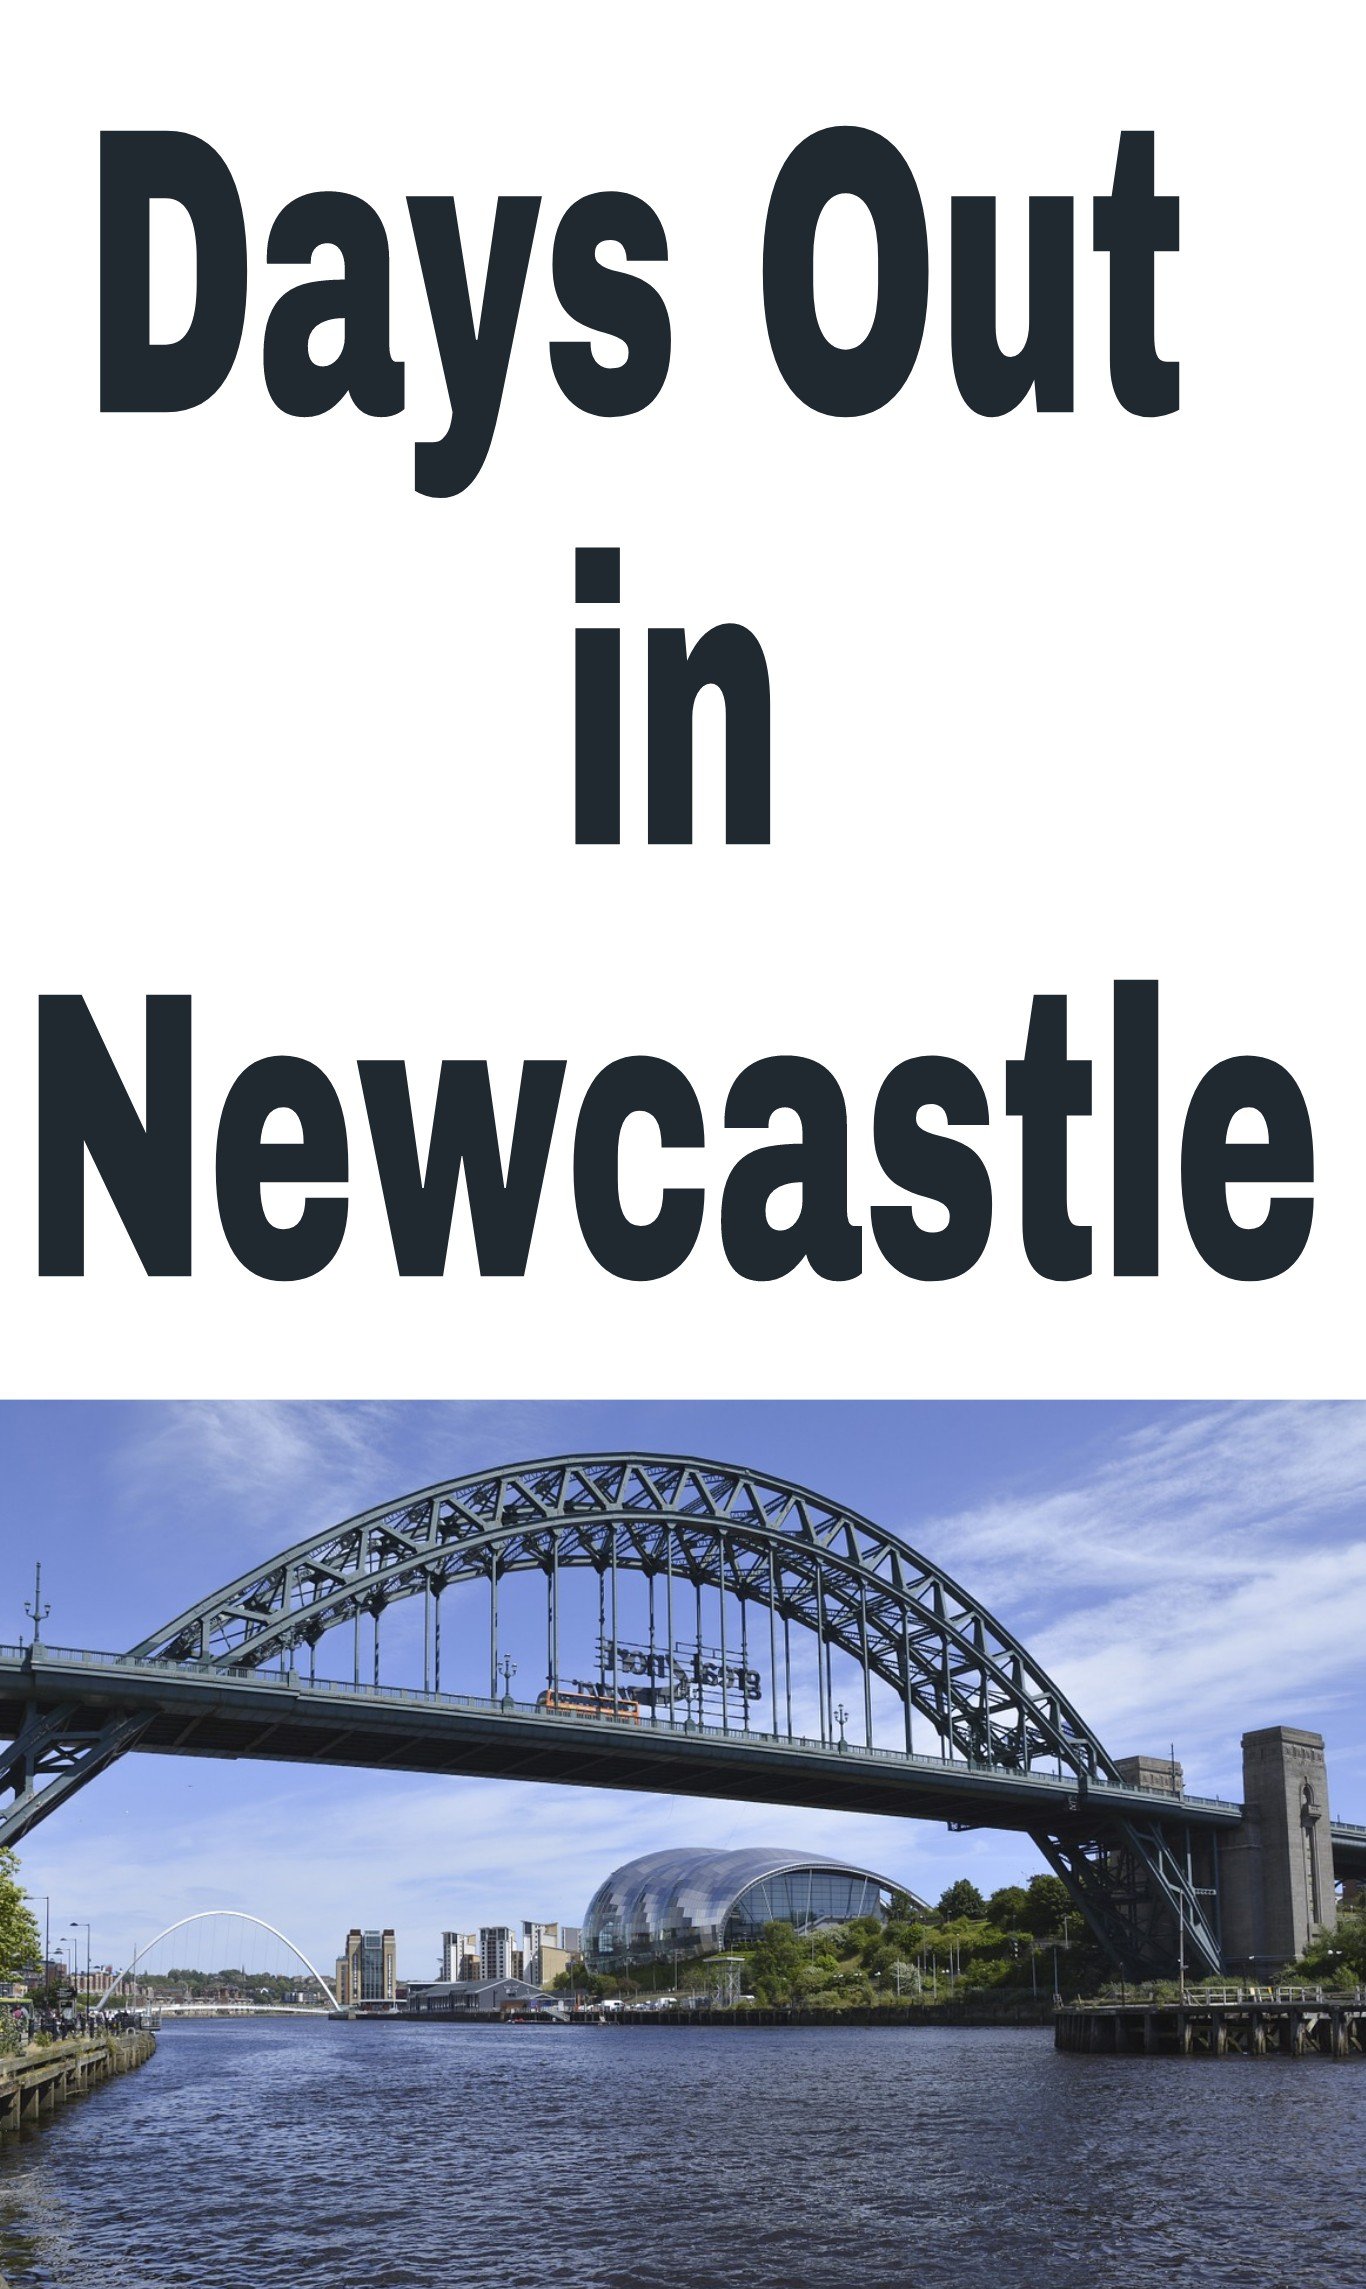 Days Out in Newcastle title with image of Tyne below